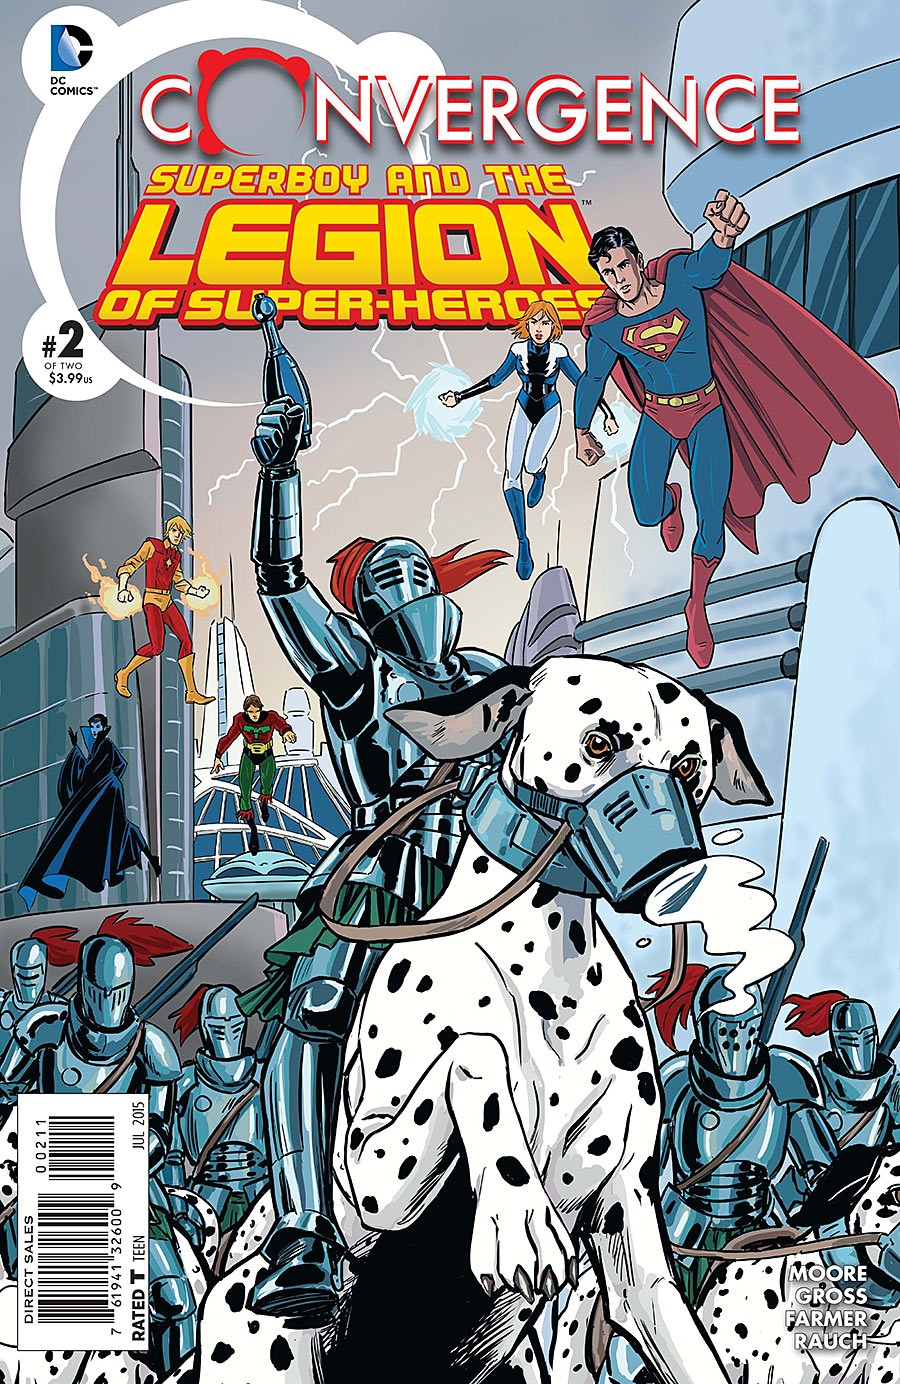 Convergence: Superboy and the Legion of Super-Heroes Vol. 1 #2